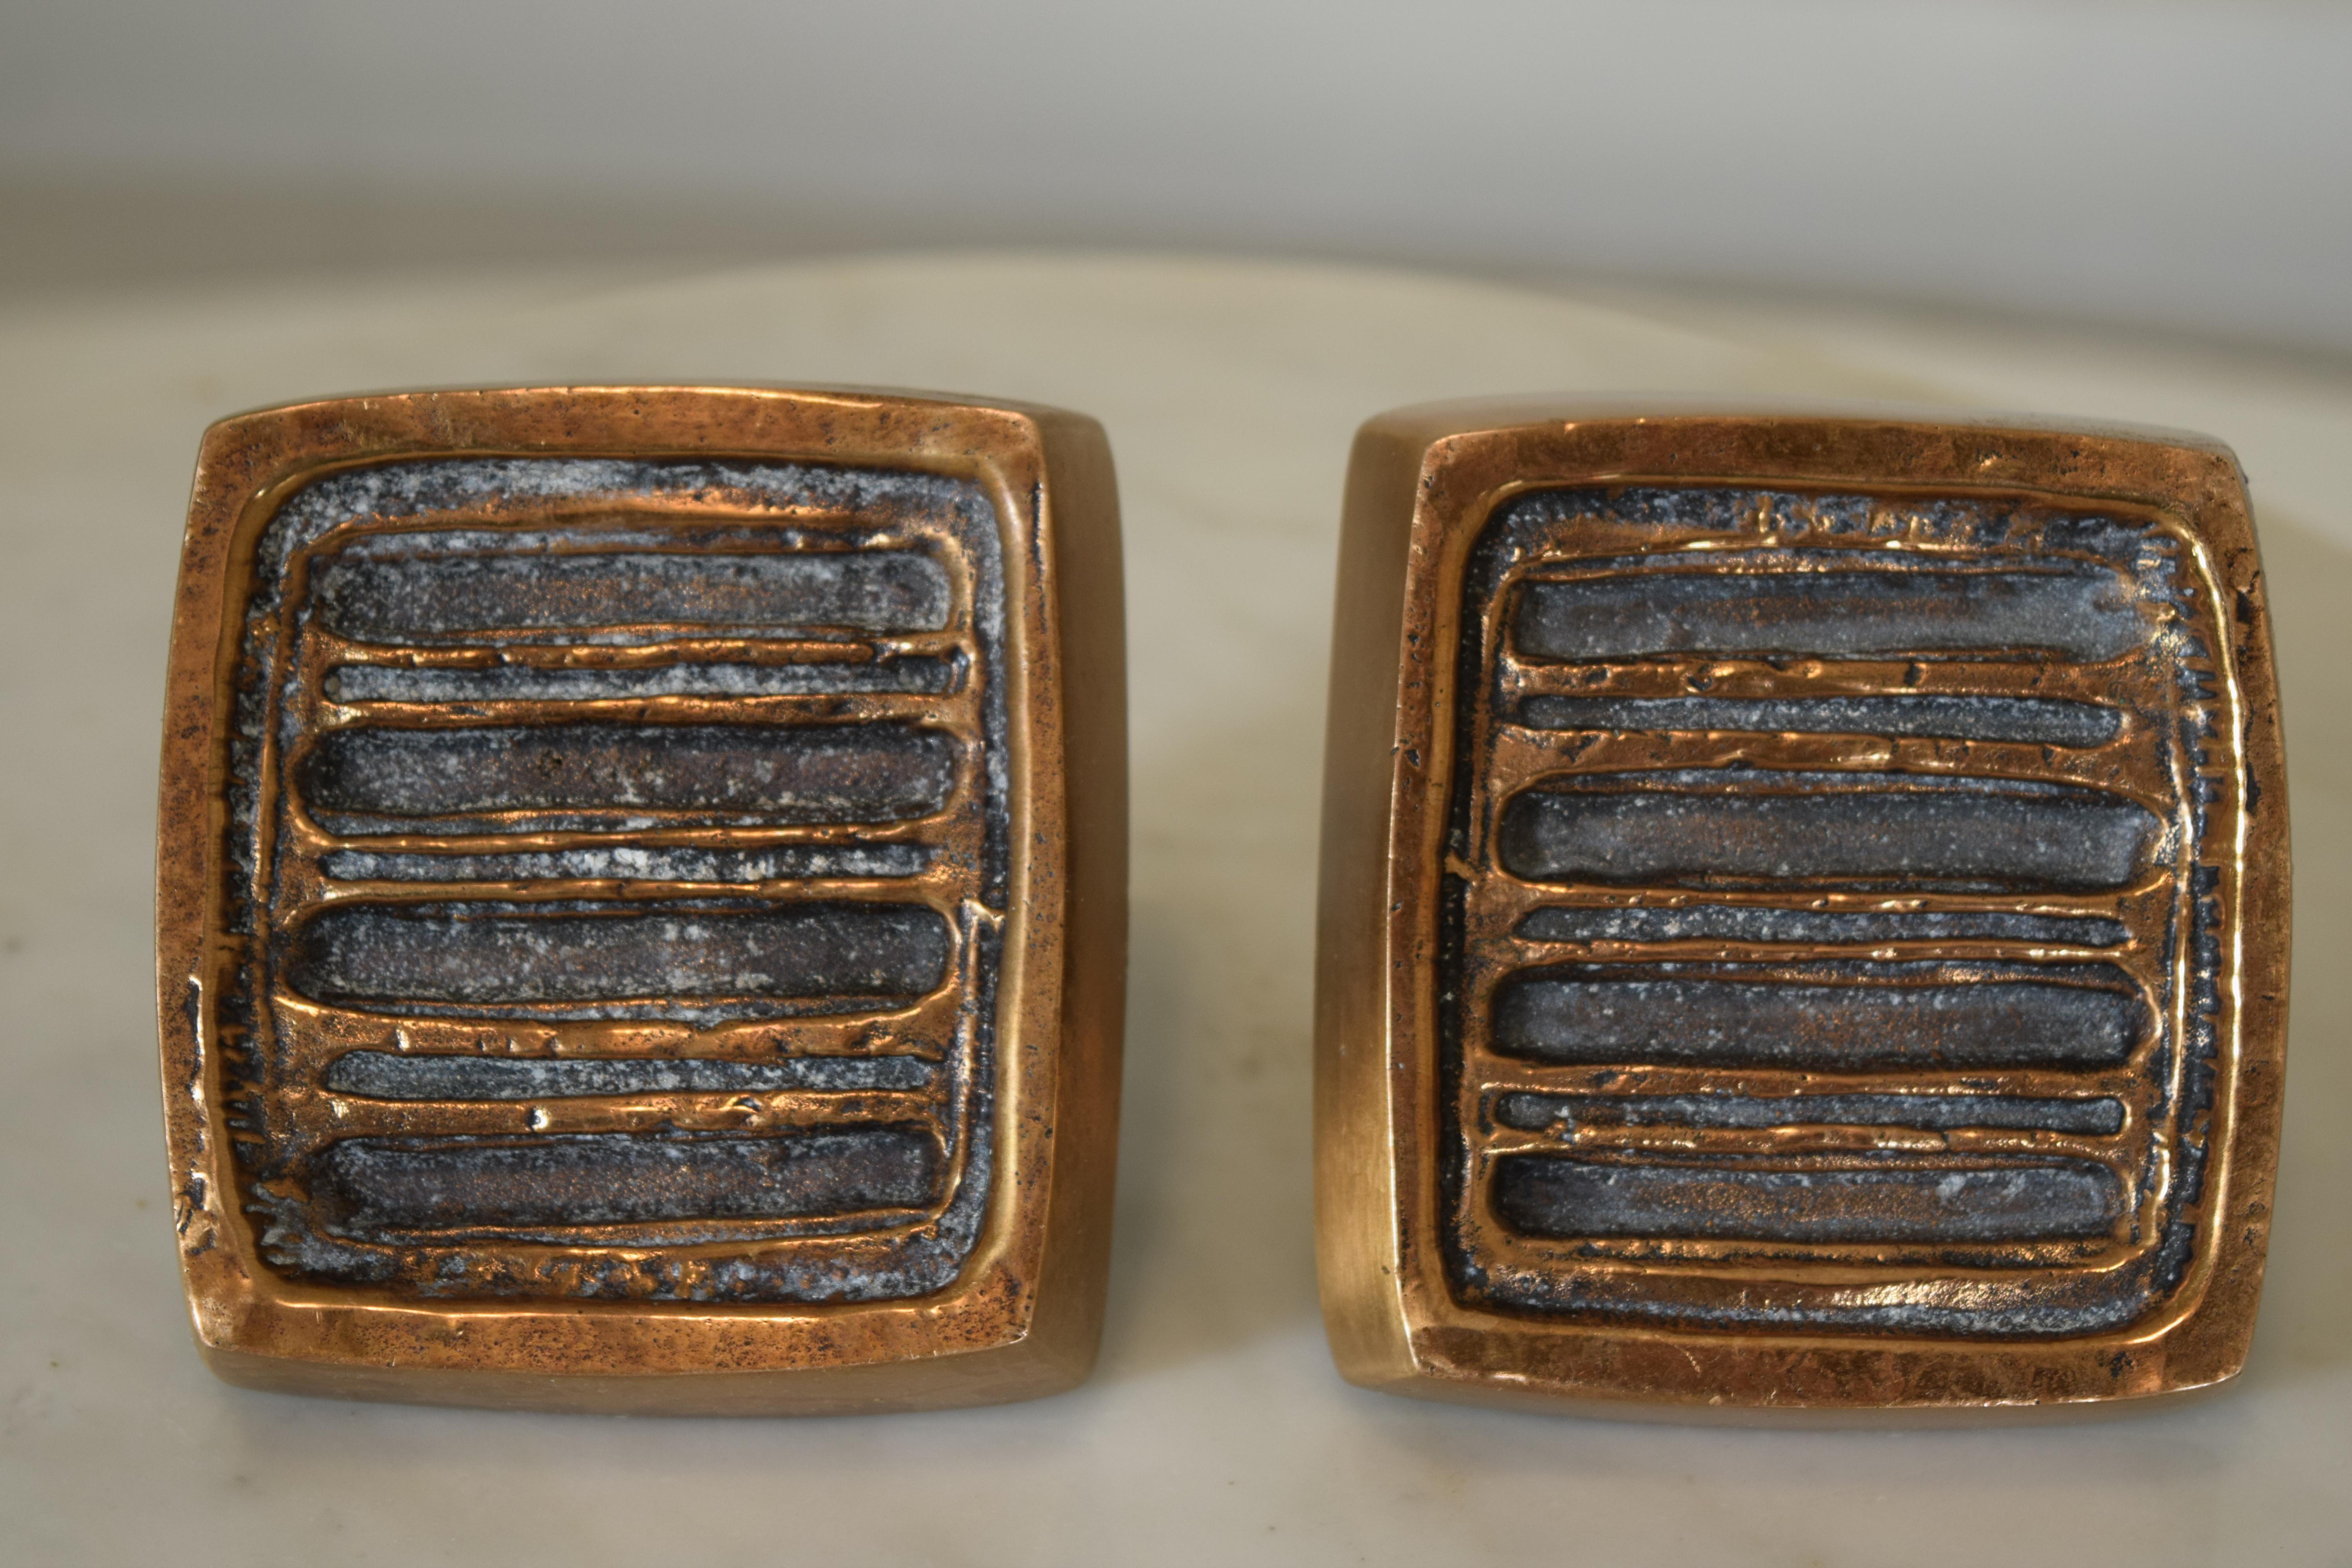 A pair of abstract bronze pulls for use in modernist residential or commercial entry door applications, circa 1960 by Forms and Surfaces. This set is likely designed by Sherrill Broudy or David Gillespie. Measures 3.75